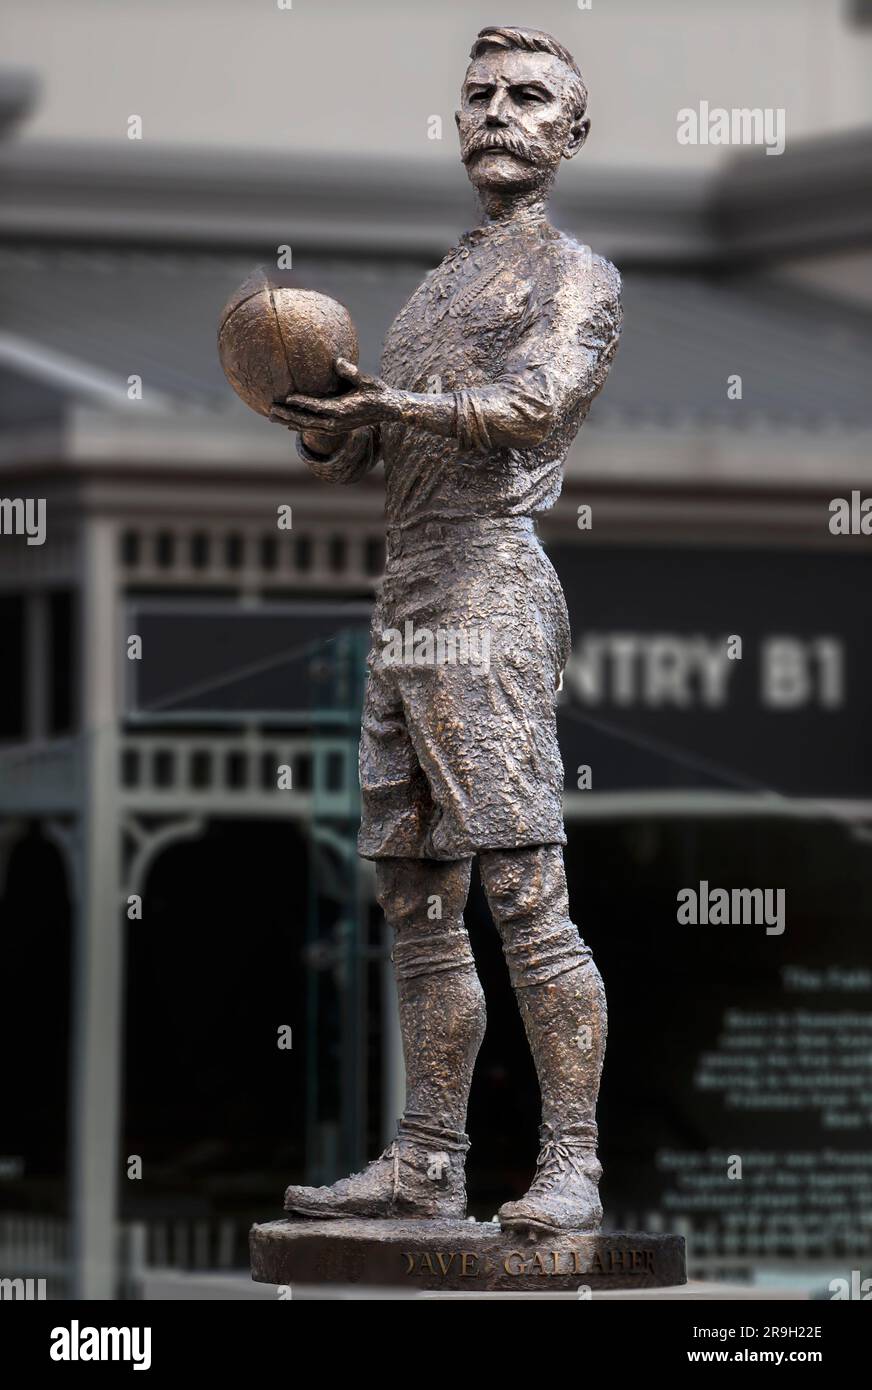 The Dave Gallaher Statue at Eden Park, Auckland, New Zealand Stock Photo